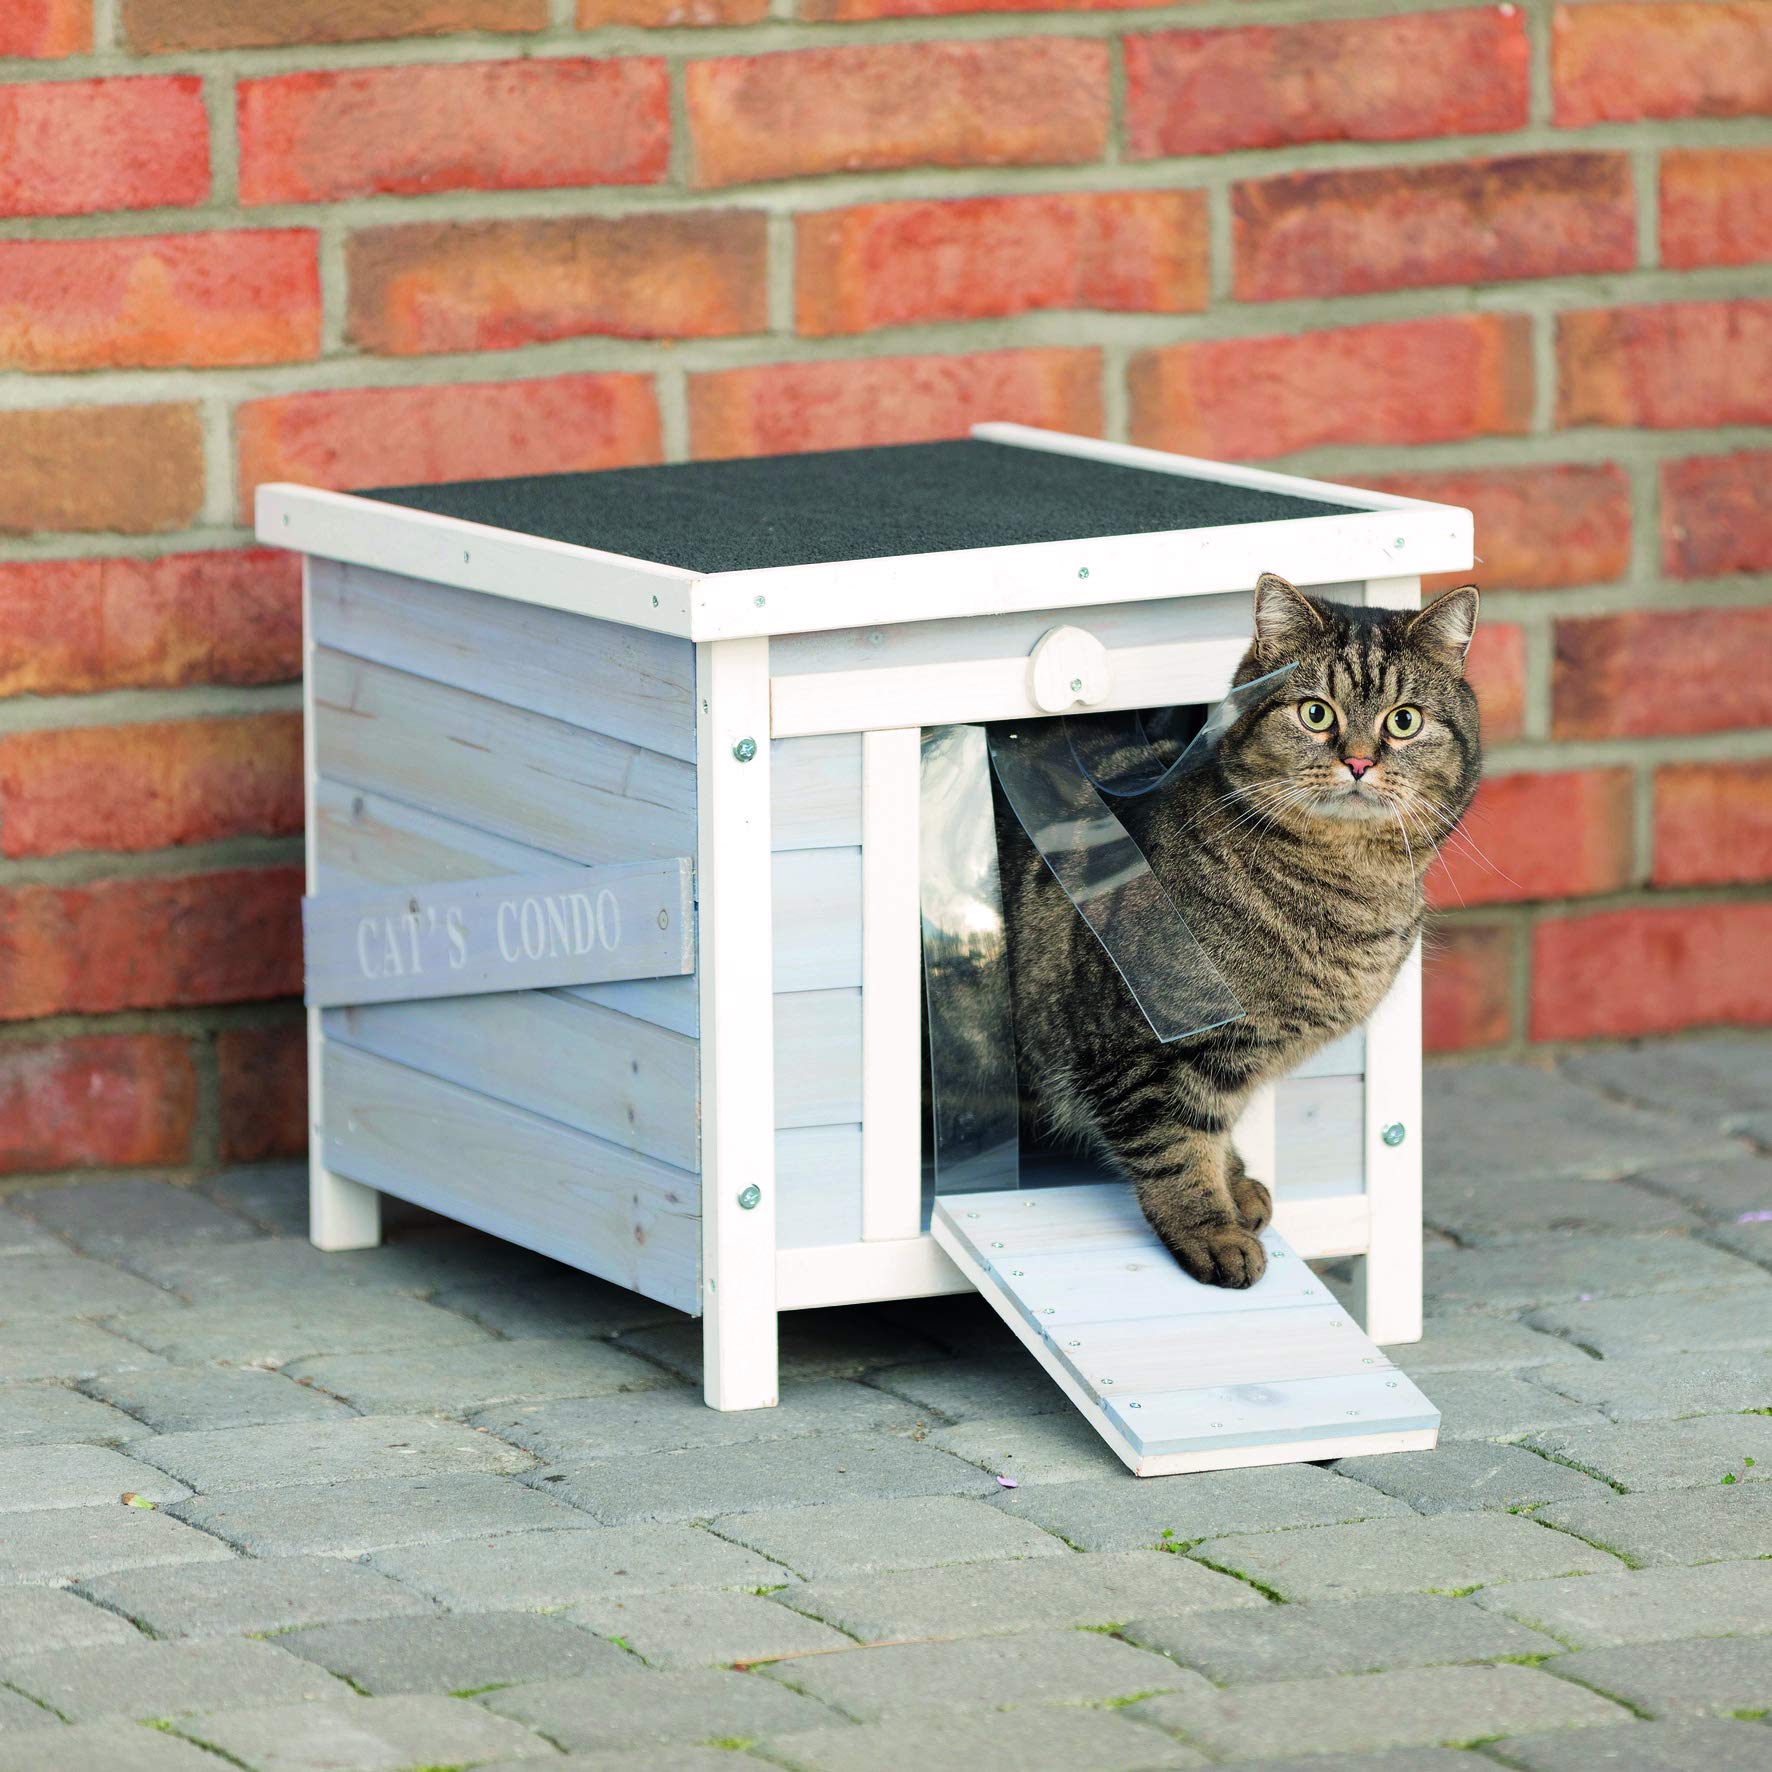 TRIXIE natura Weatherproof Small Outdoor Pet Home, Cat House, Rabbit House, Shelter for Feral Cats or Small Animals